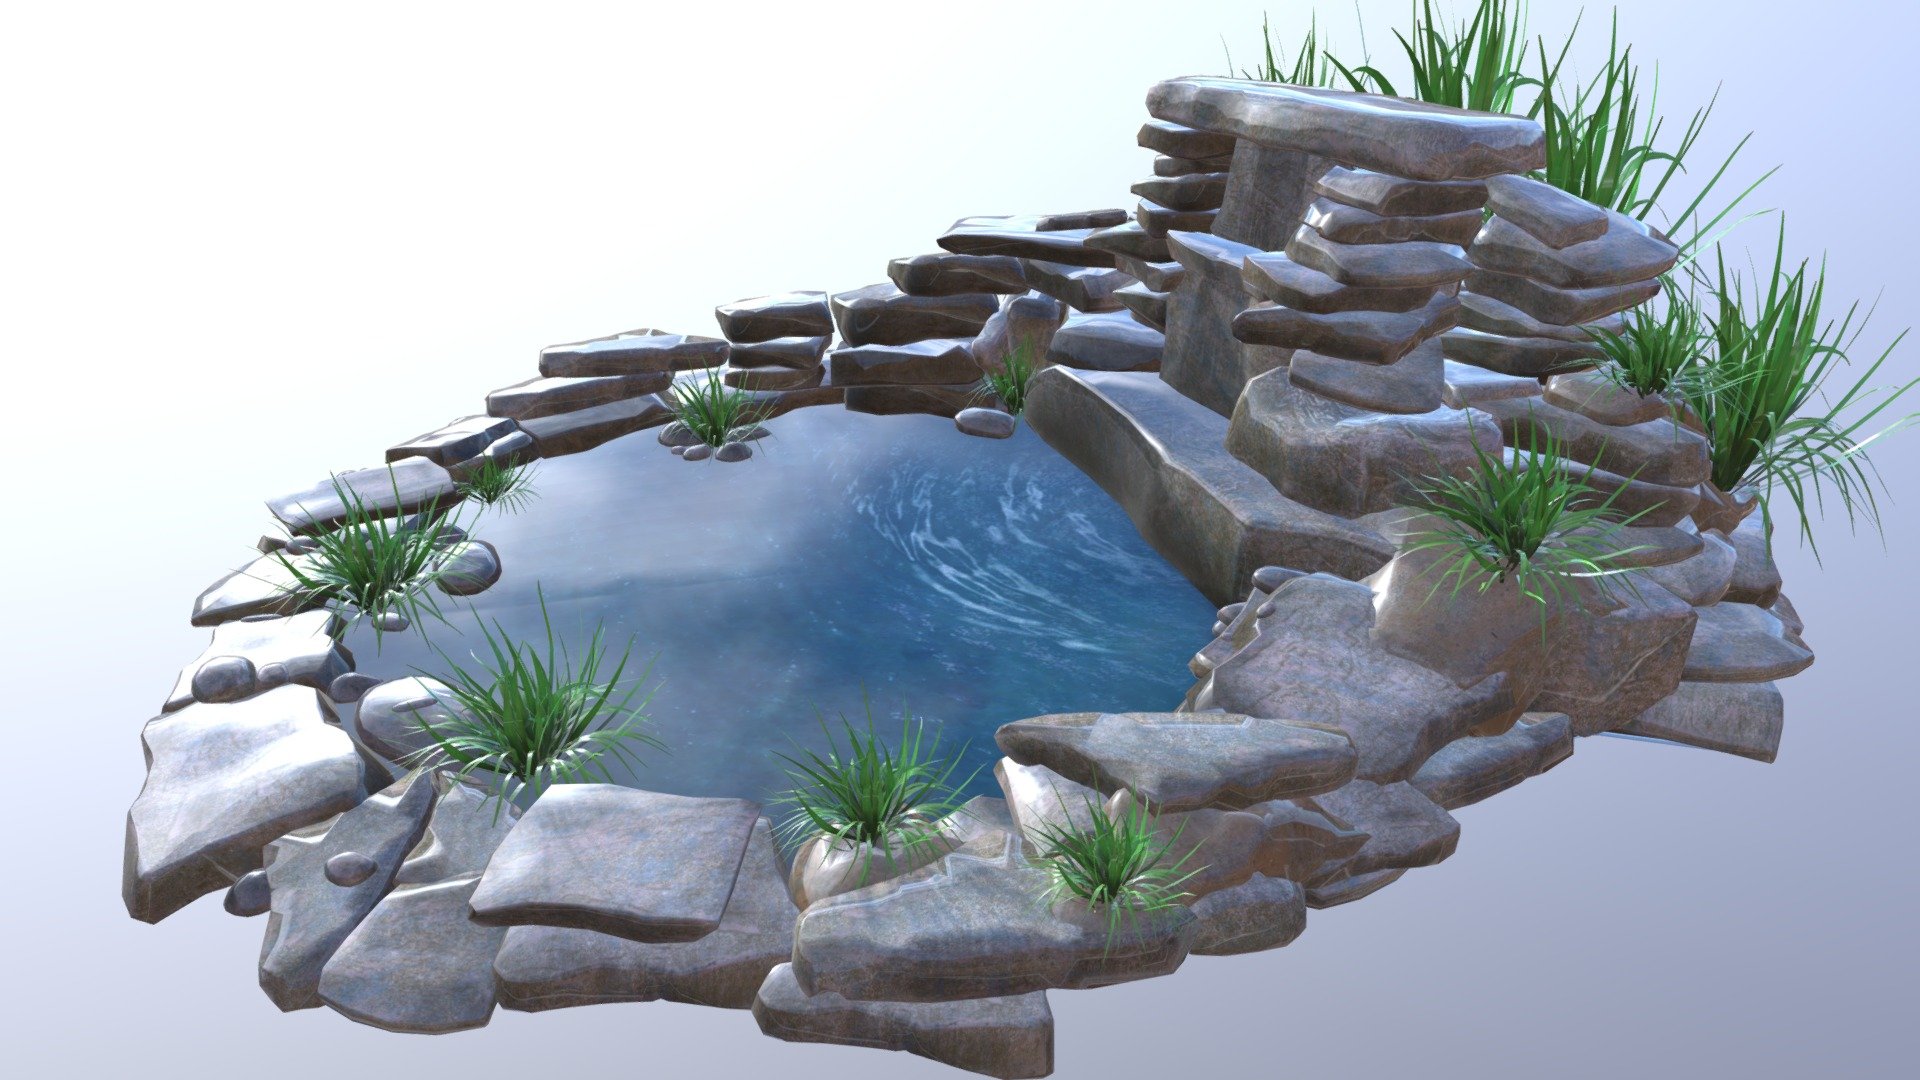 It's a rock fountain. Do you like rock fountains too? Yeah, I know you do. So get one. It's good for you. Drink some of its water that has healing properties. Thanks! - Rock Fountain - 3D model by HardzGal 3d model